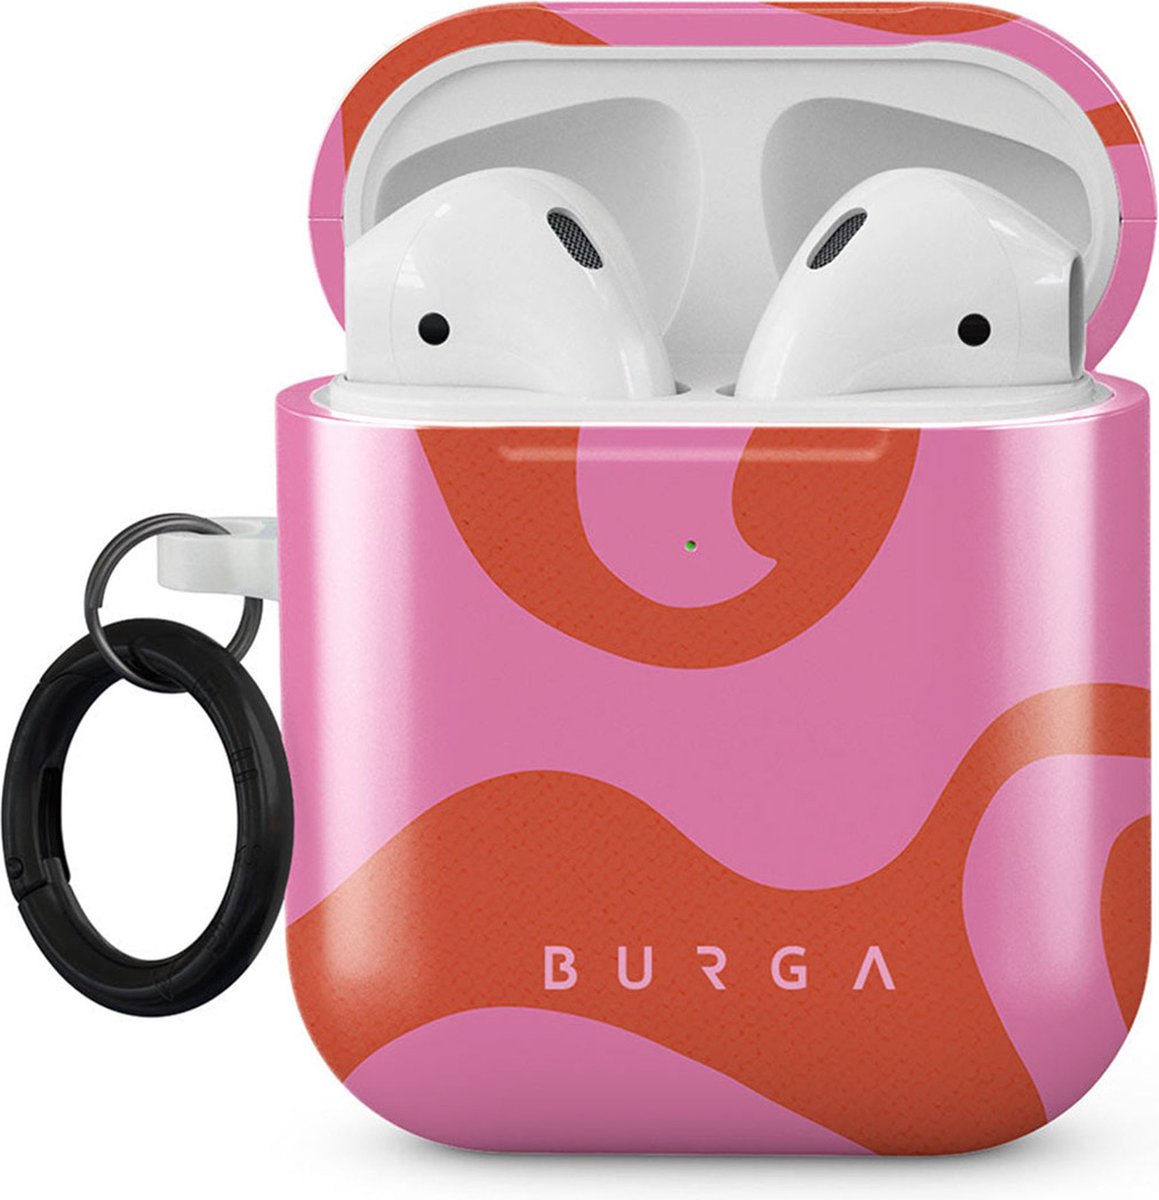 AirPods 1 / 2 Hoesje - Burga Airpods case - roze